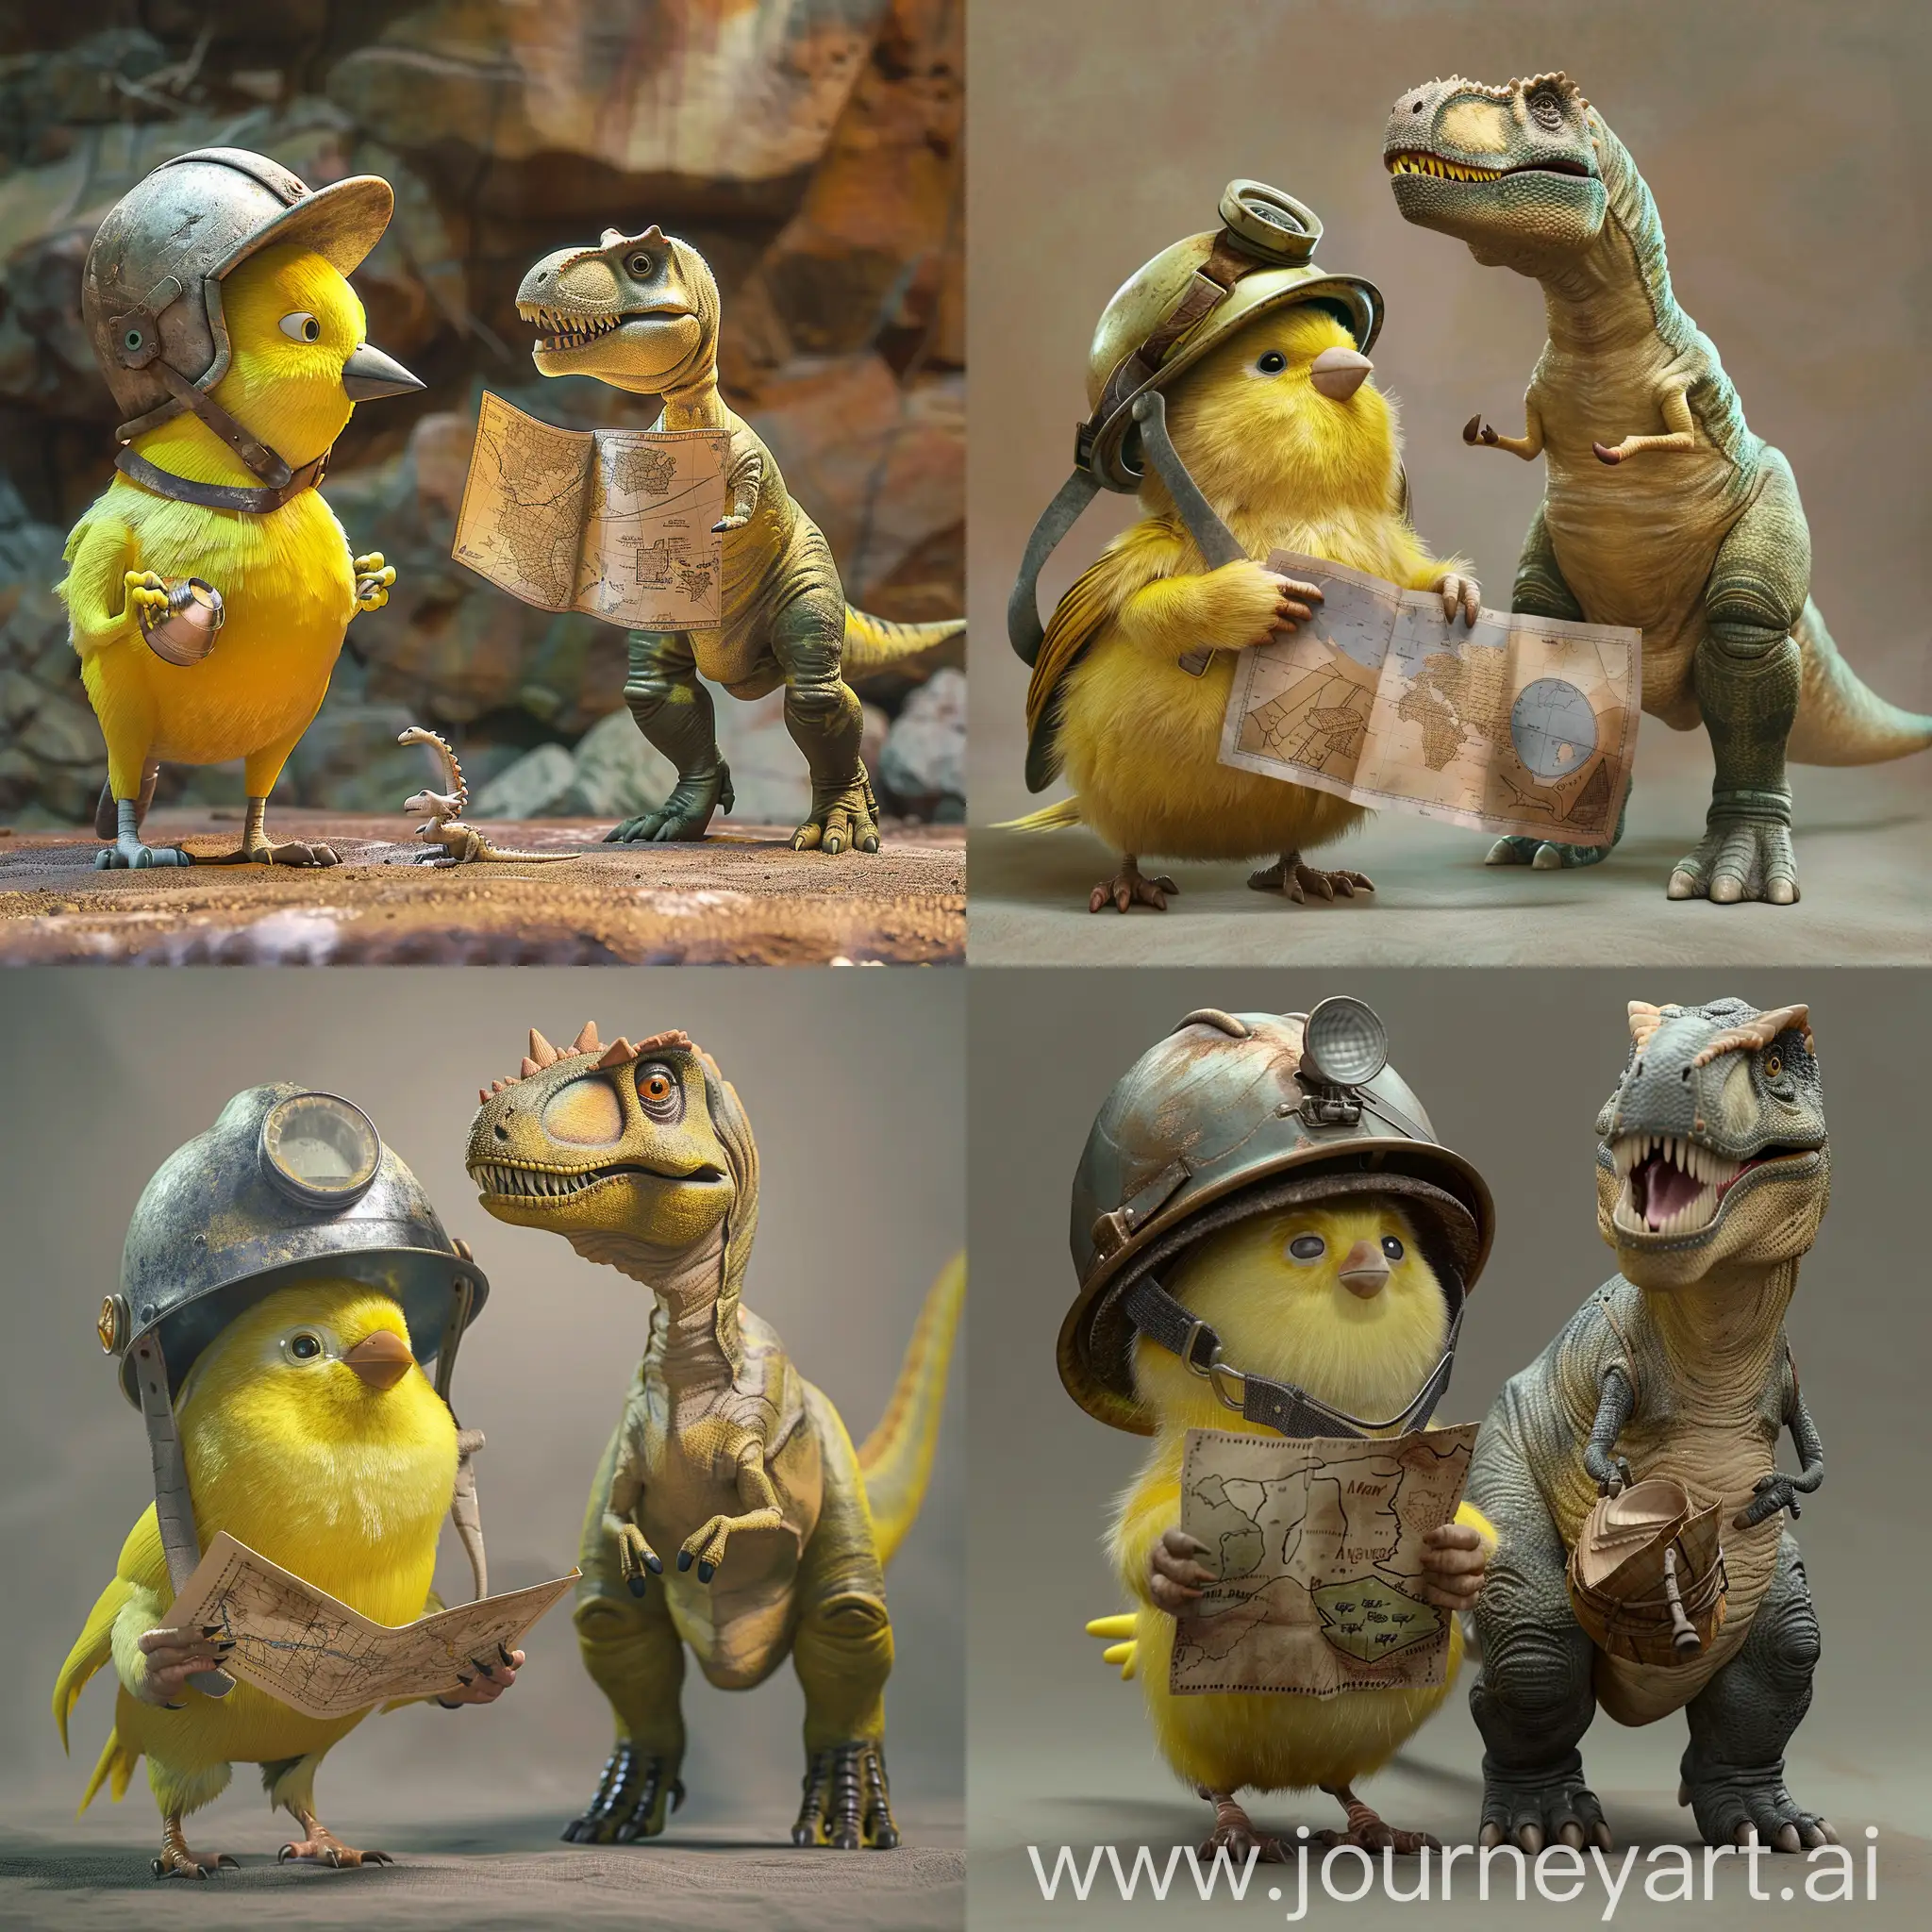 Exploring-Canary-Bird-and-MapHolding-Dinosaur-in-a-Miners-Adventure